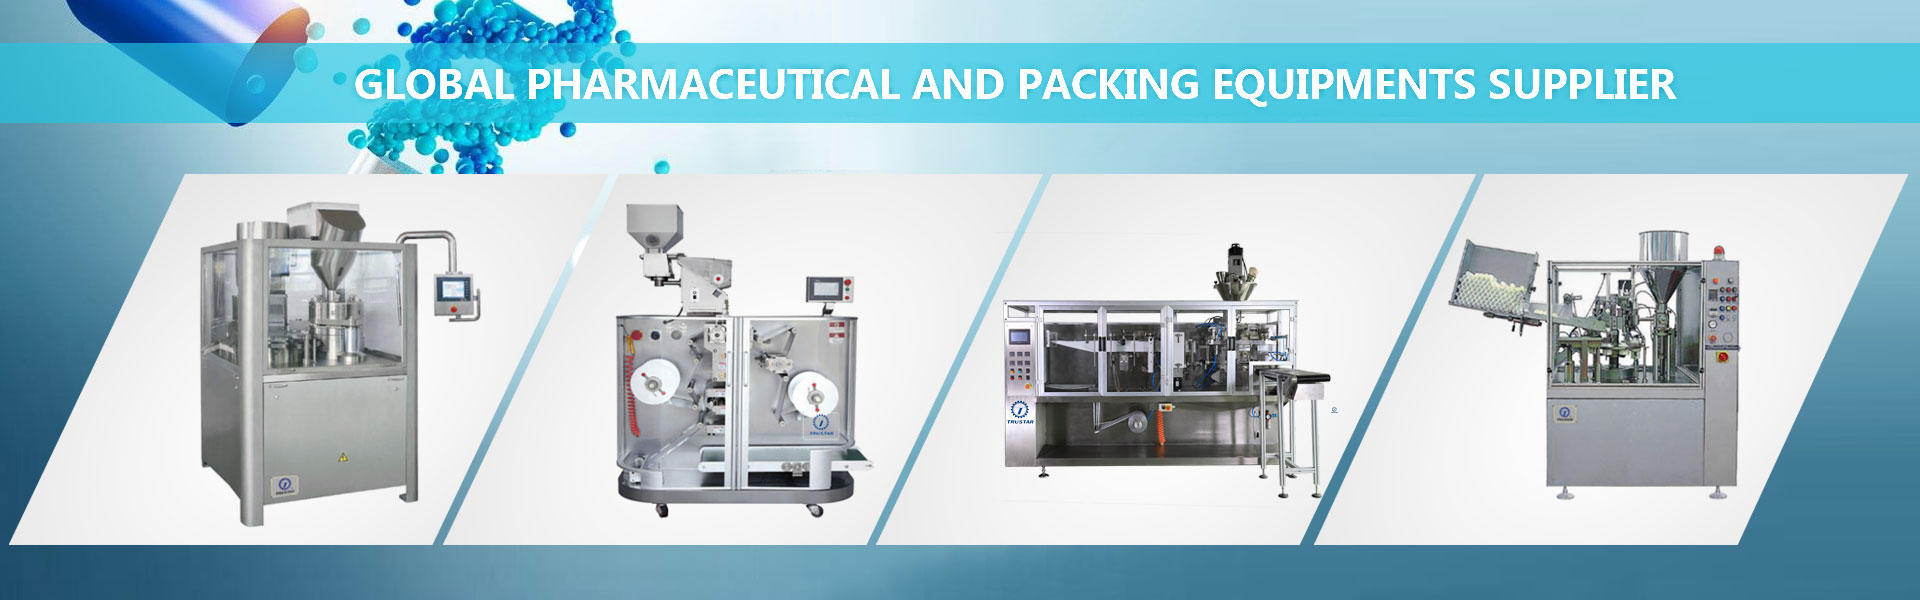 Global Pharmaceutical And Packing Equipments Supplier